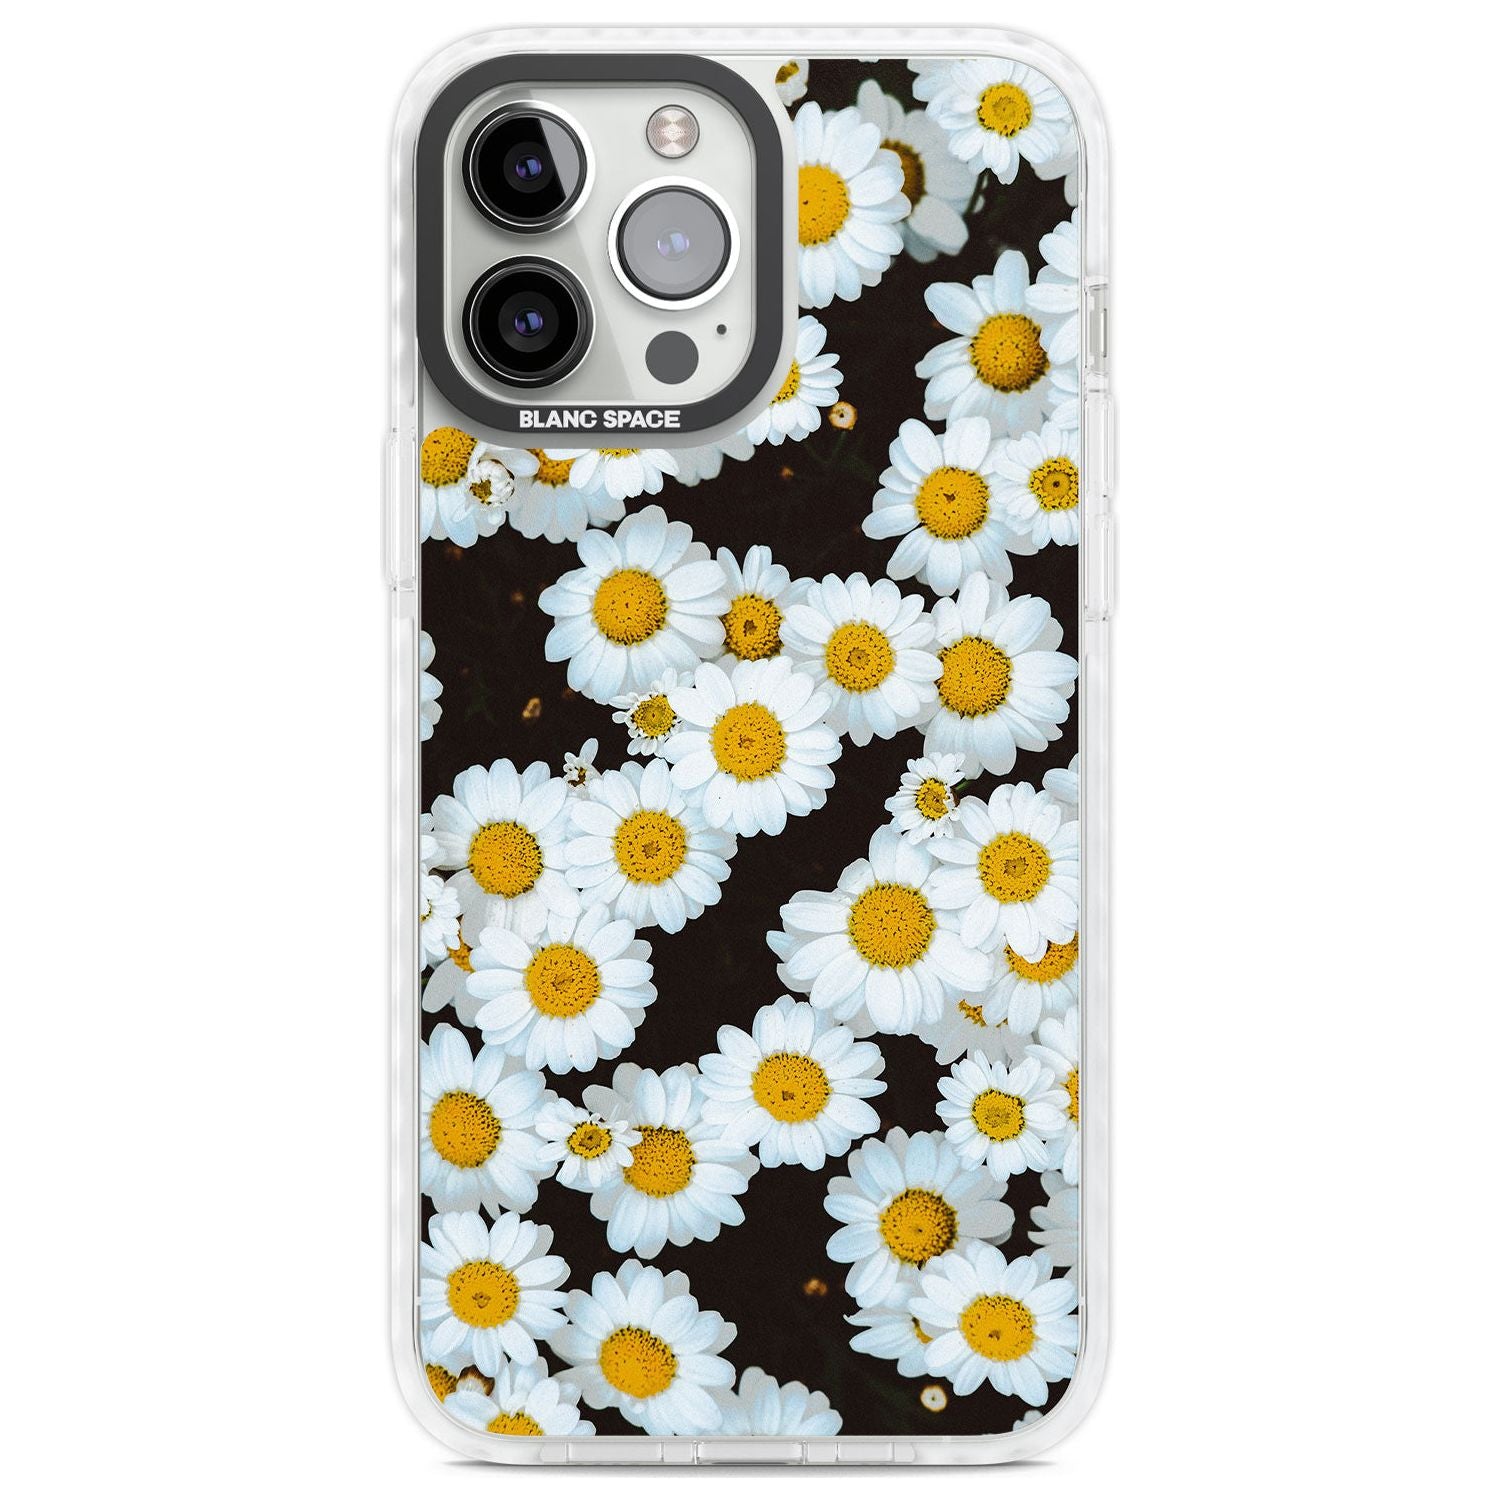 Daisies - Real Floral Photographs Phone Case iPhone 13 Pro Max / Impact Case,iPhone 14 Pro Max / Impact Case Blanc Space